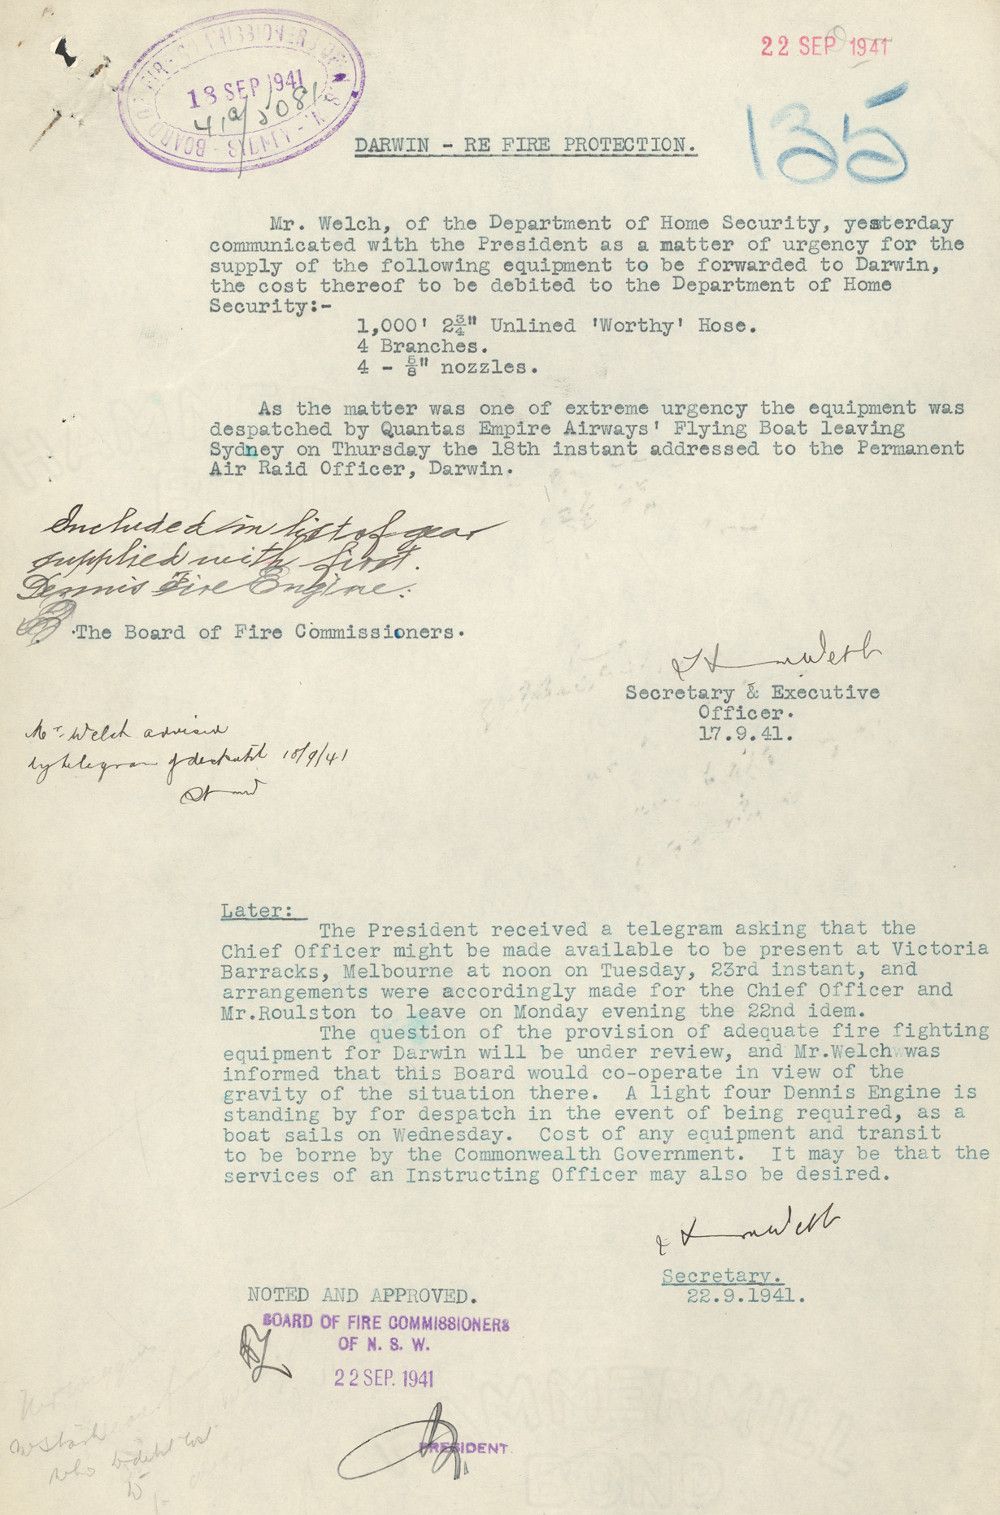 Typed letter titled Darwin re fire protection. Stamped Sep 1941